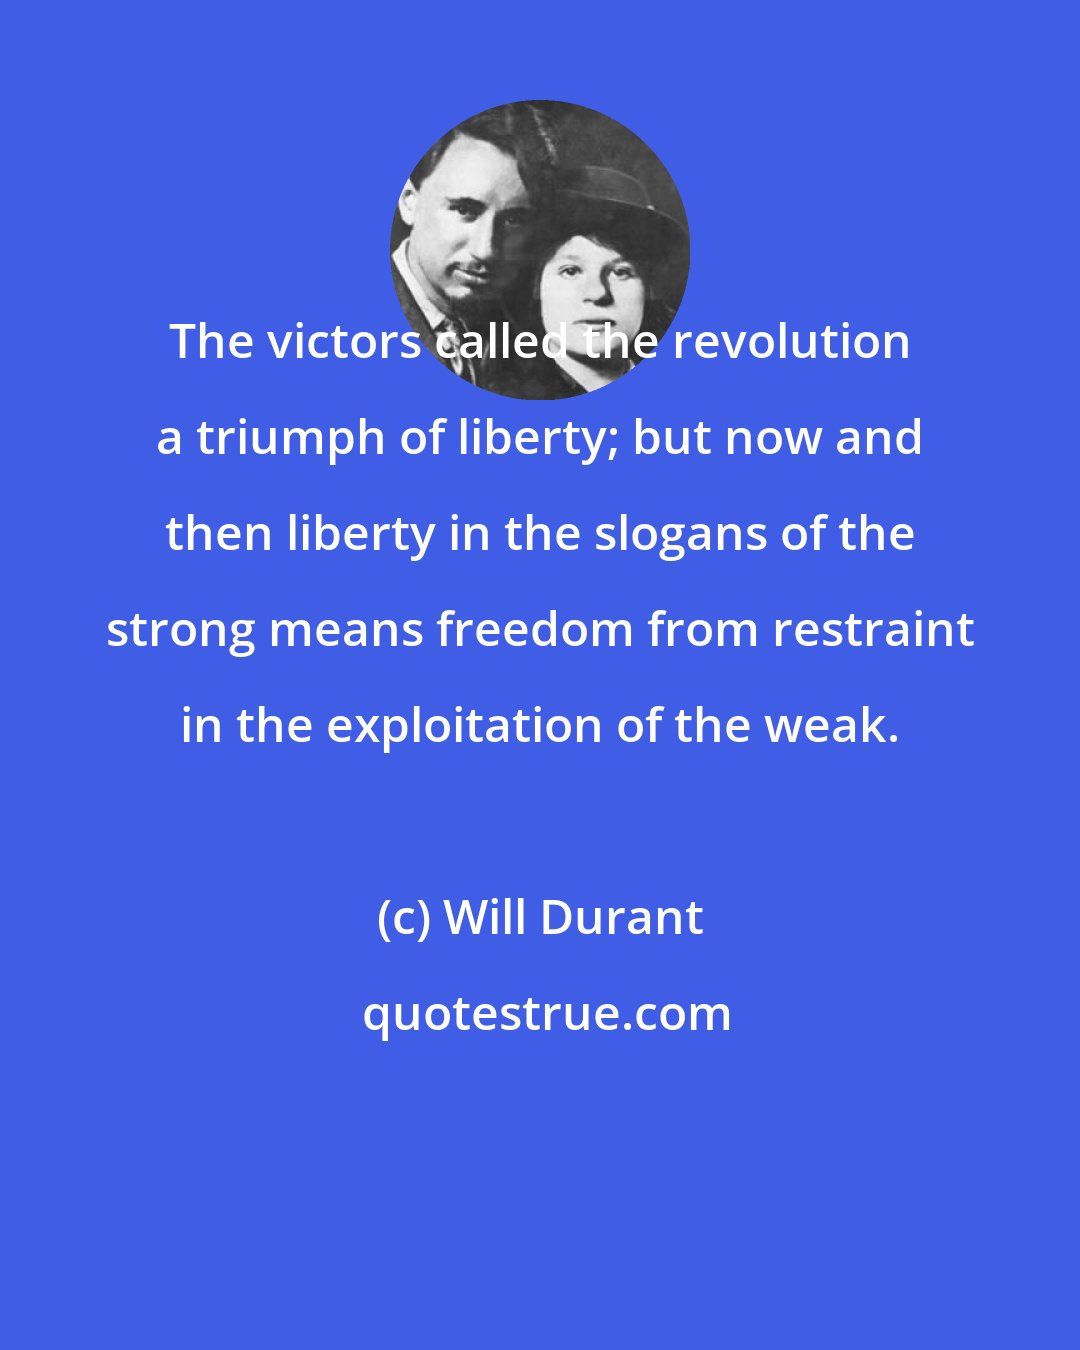 Will Durant: The victors called the revolution a triumph of liberty; but now and then liberty in the slogans of the strong means freedom from restraint in the exploitation of the weak.